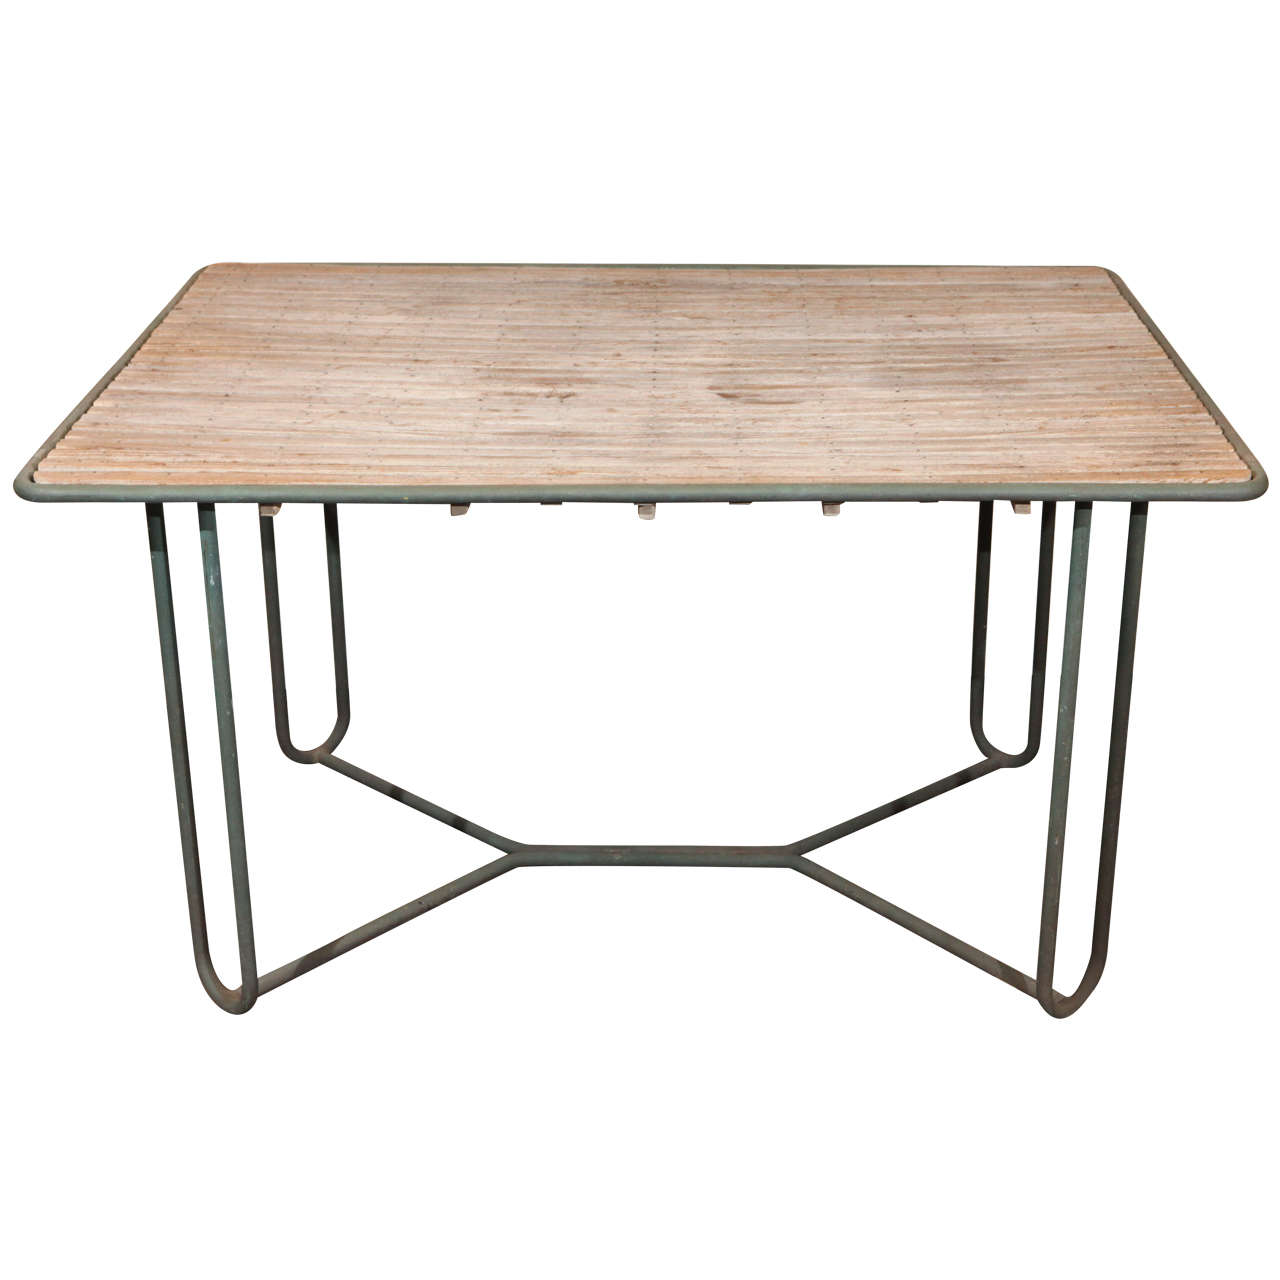 Walter Lamb table, 1950s, offered by JF Chen